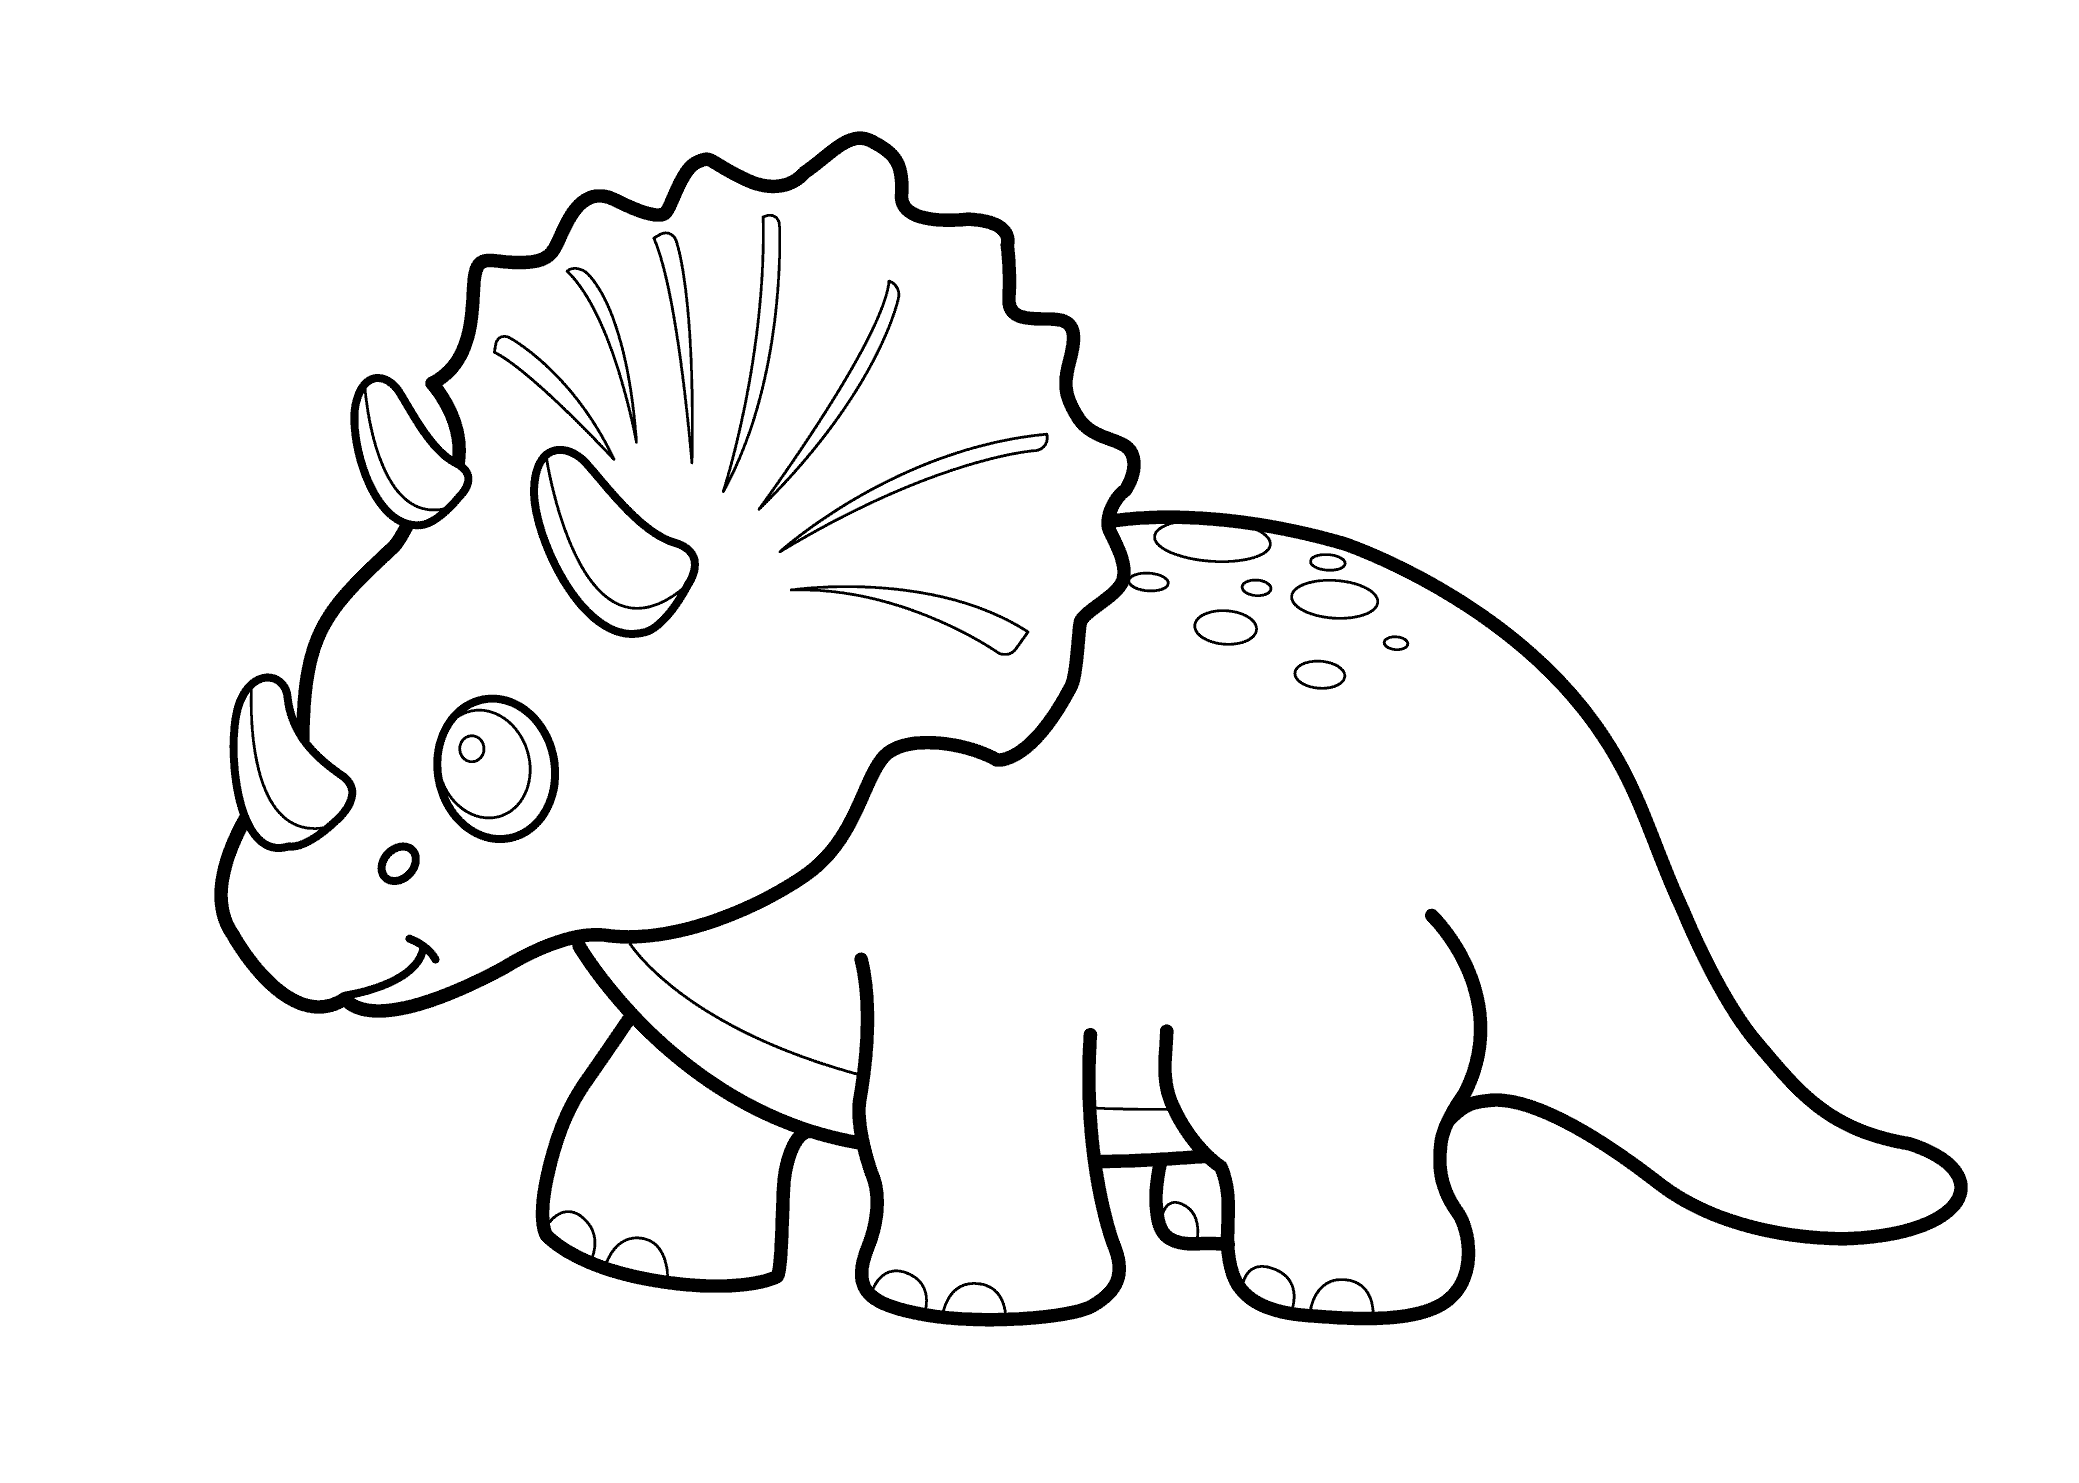 Funny dinosaur triceratops cartoon coloring pages for kids.